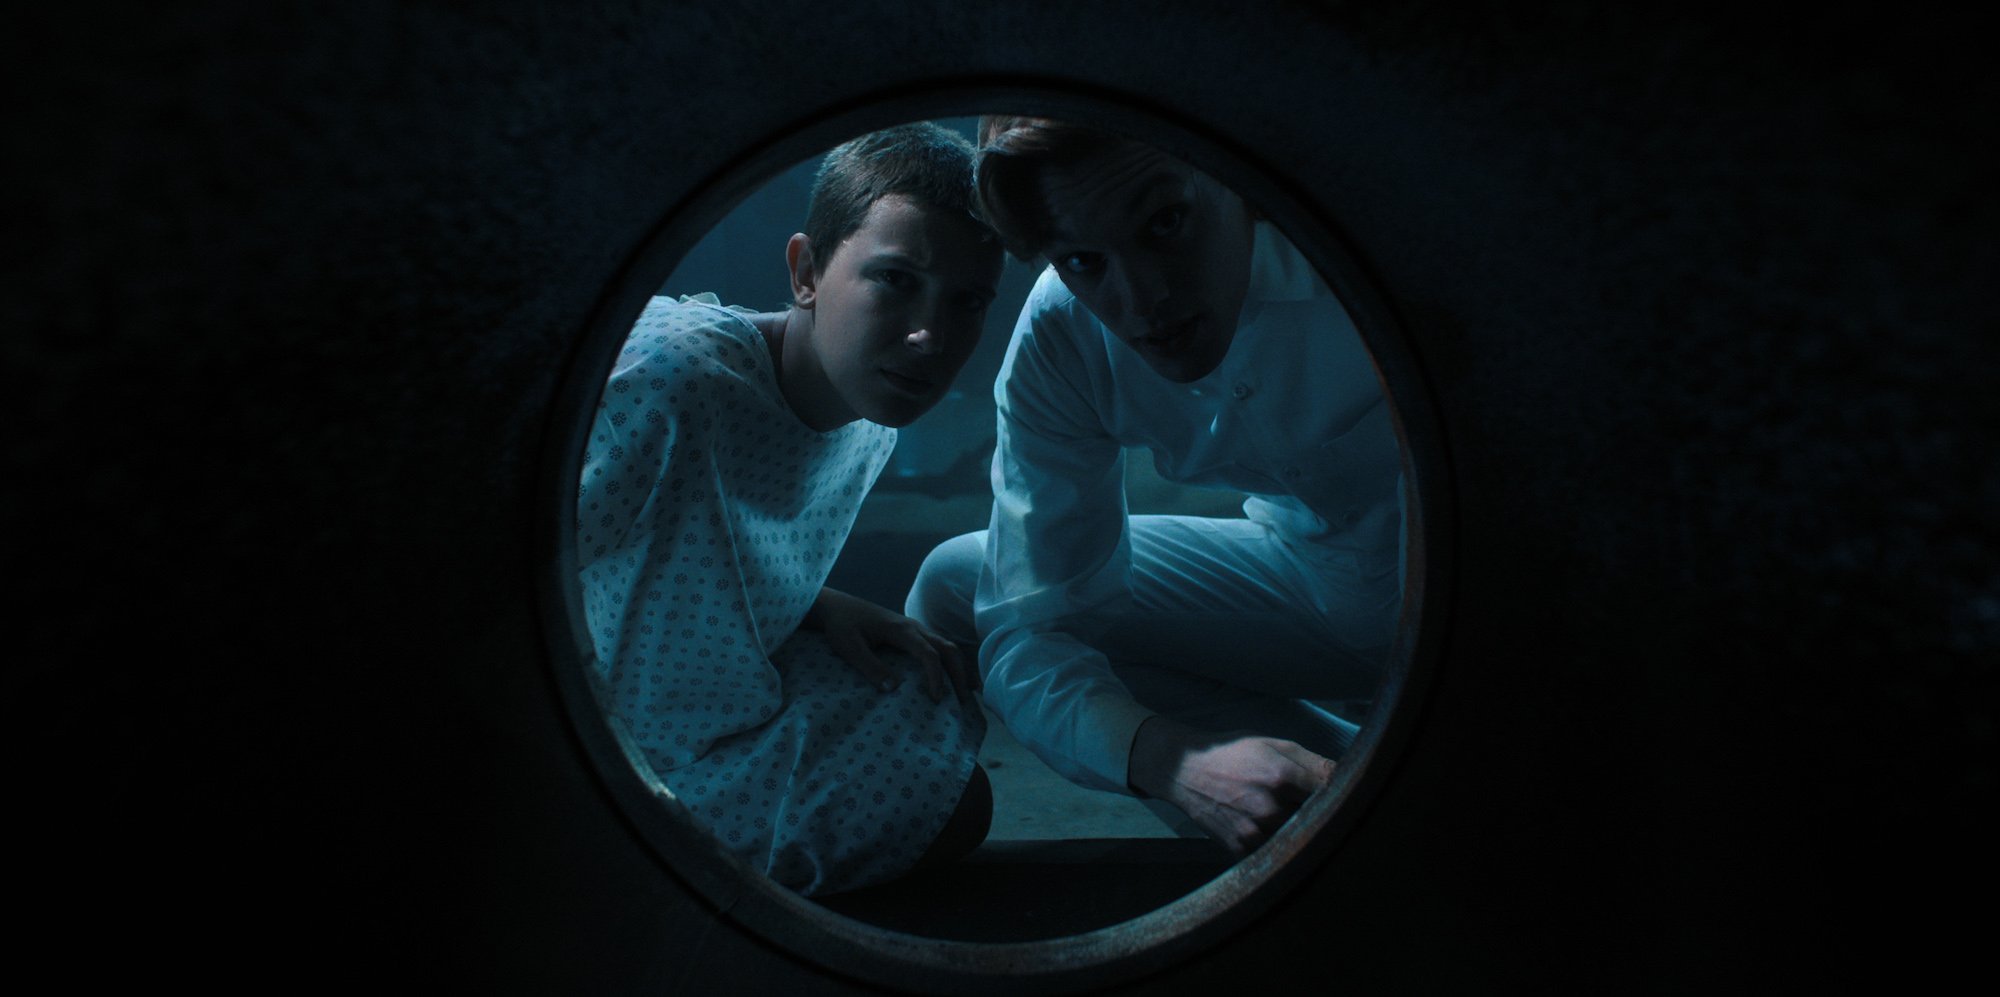 'Stranger Things 4' characters Eleven and Henry/001 peer into a tunnel in a production still.